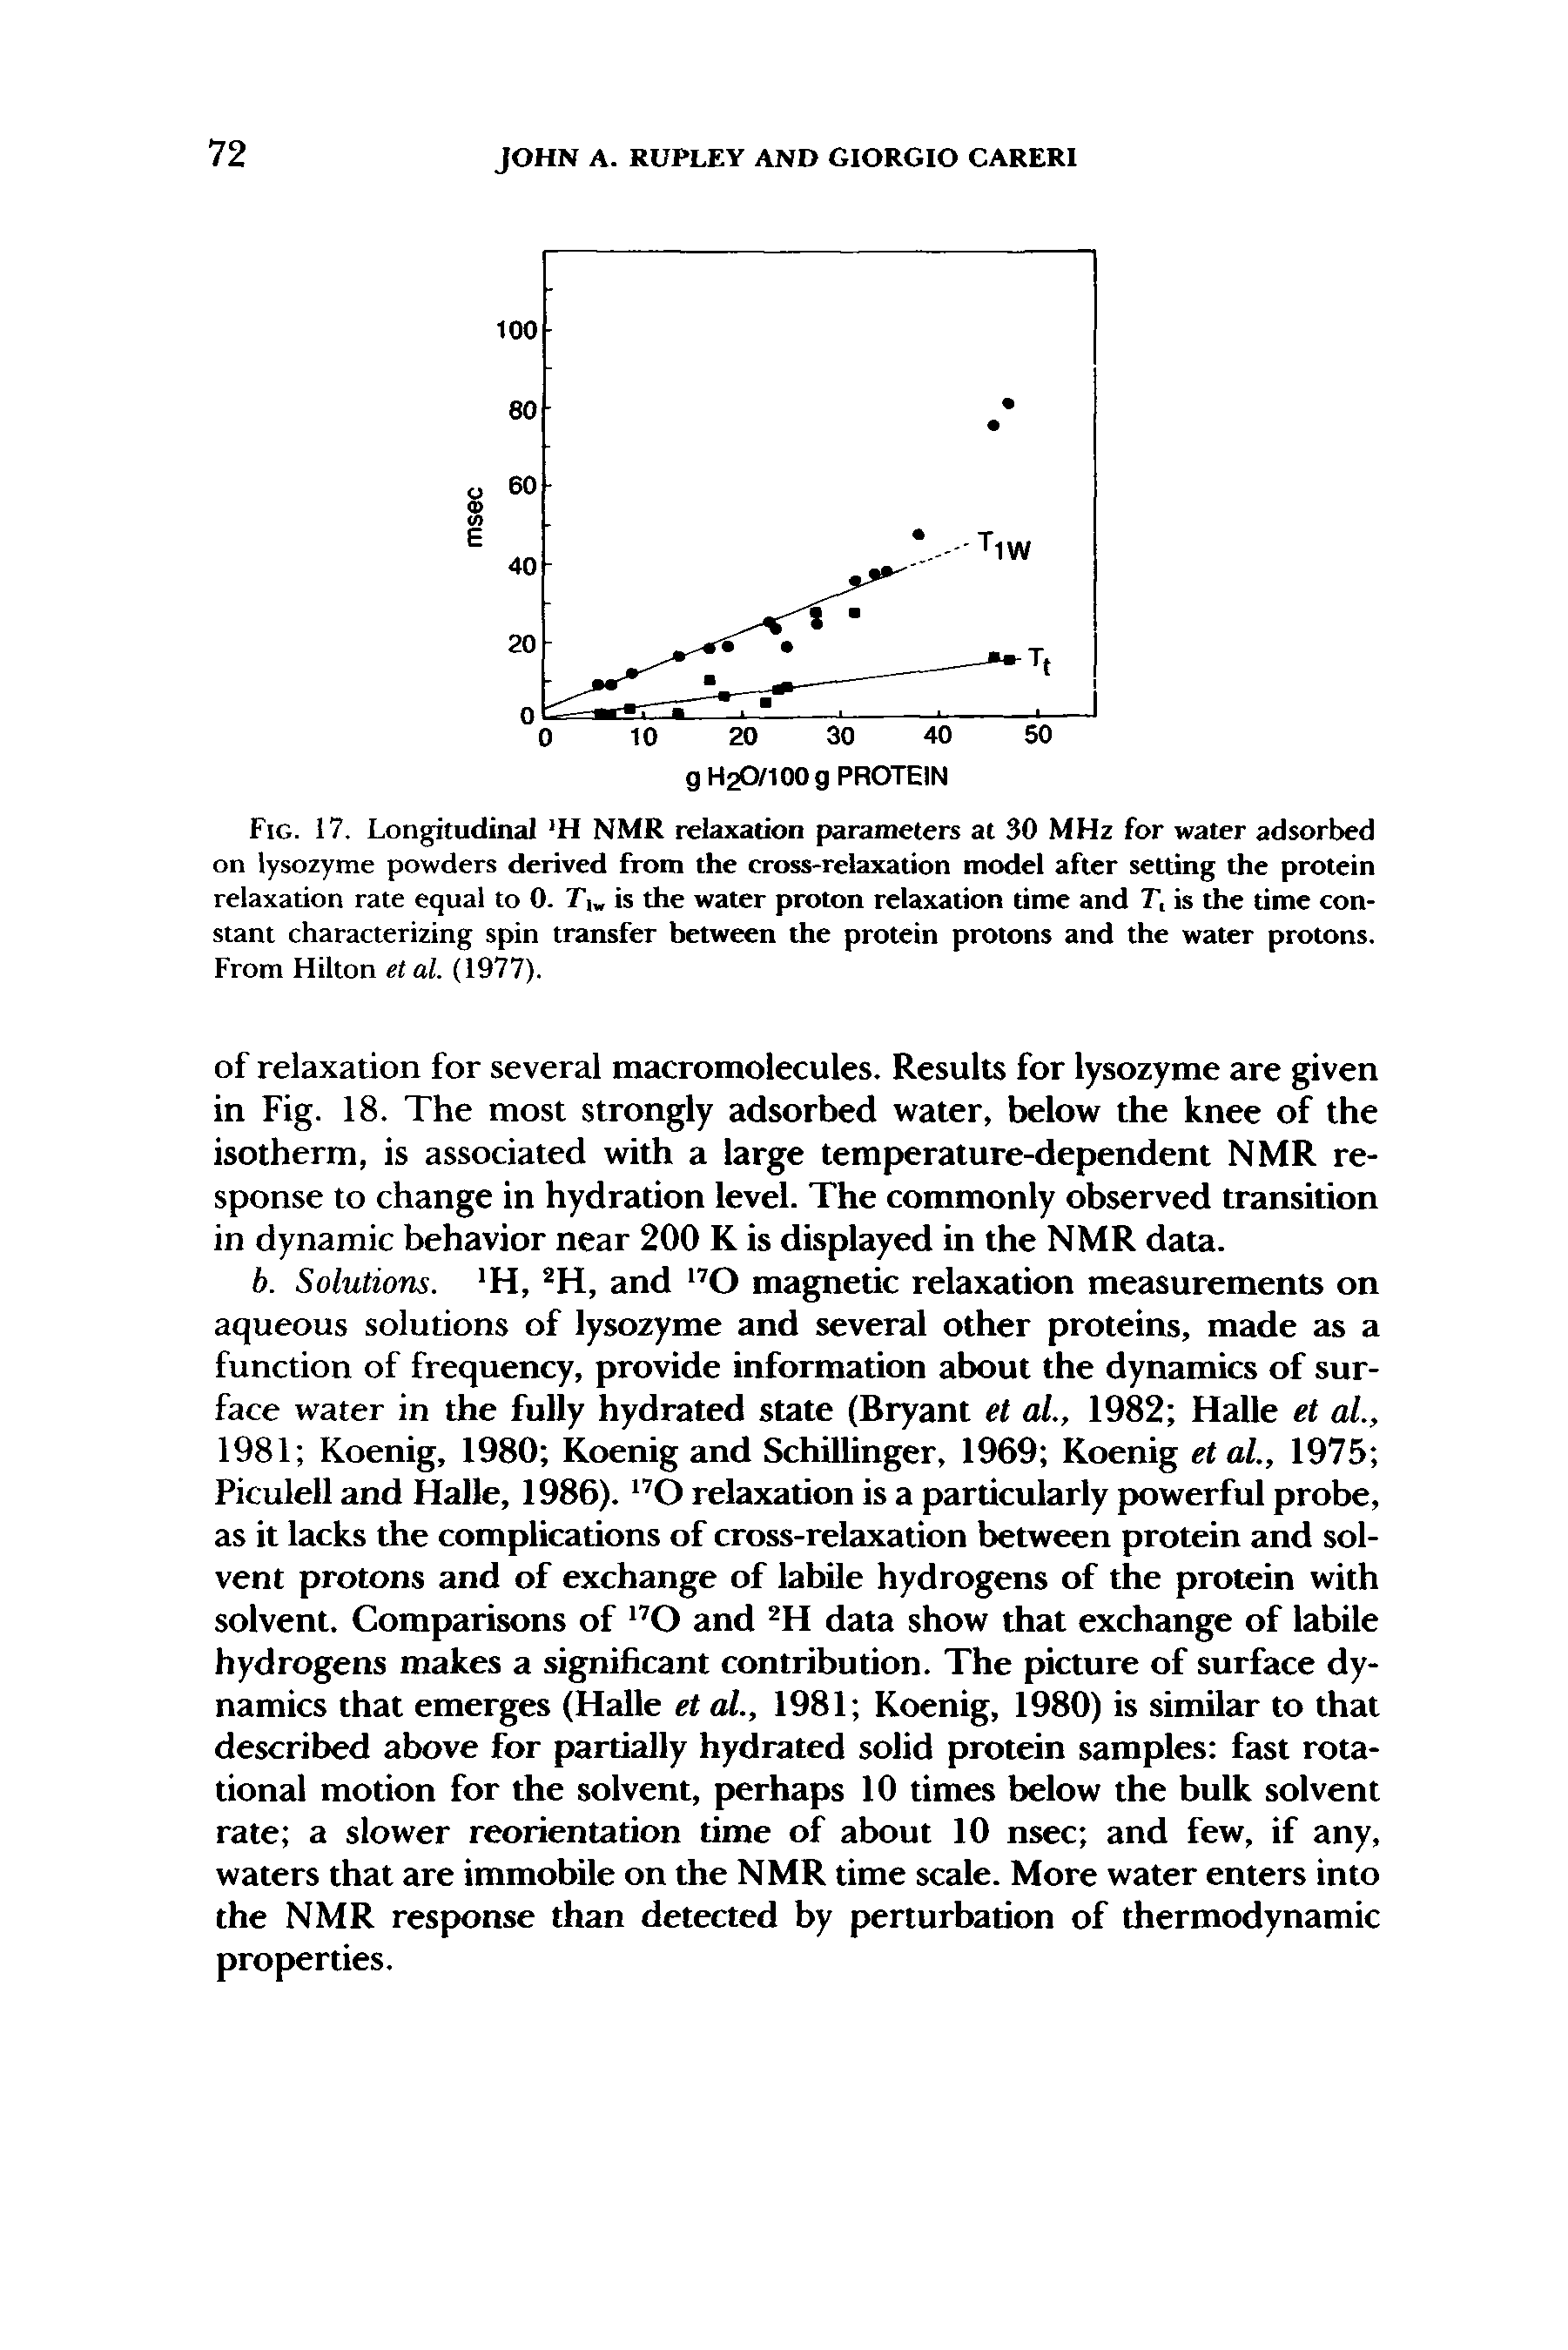 Fig. 17. Longitudinal H NMR relaxation parameters at 30 MHz for water adsorbed on lysozyme powders derived from the cross-relaxation model after setting the protein relaxation rate equal to 0. Tis the water proton relaxation time and 7", is the time constant characterizing spin transfer between the protein protons and the water protons. From Hilton etal. (1977).